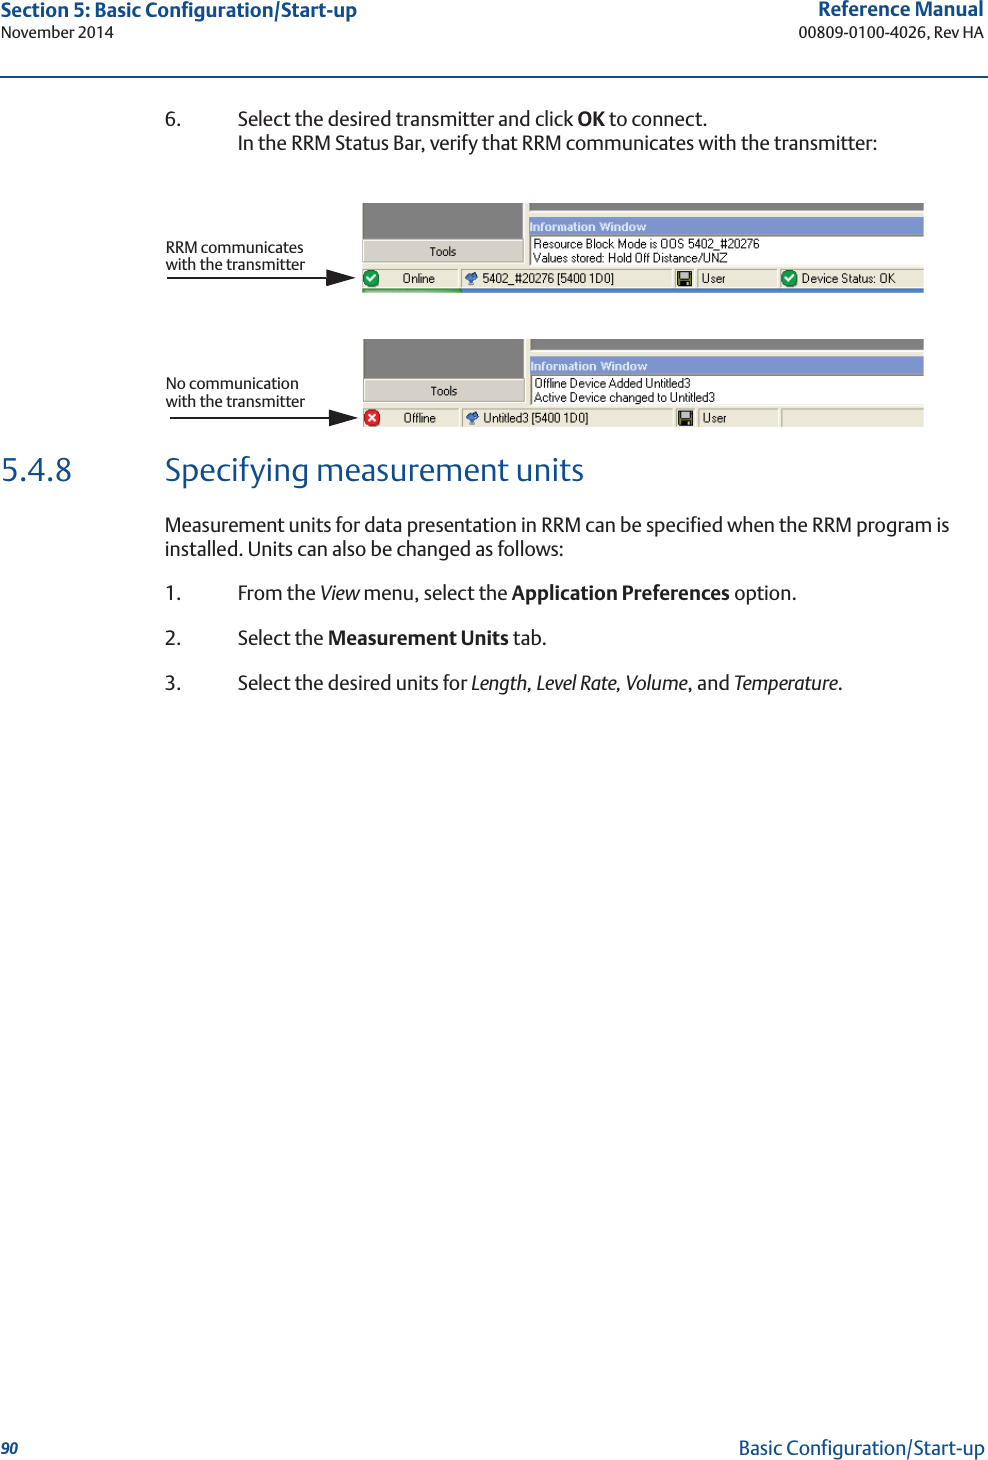 90Reference Manual00809-0100-4026, Rev HASection 5: Basic Configuration/Start-upNovember 2014Basic Configuration/Start-up6. Select the desired transmitter and click OK to connect. In the RRM Status Bar, verify that RRM communicates with the transmitter:5.4.8 Specifying measurement unitsMeasurement units for data presentation in RRM can be specified when the RRM program is installed. Units can also be changed as follows: 1. From the View menu, select the Application Preferences option. 2. Select the Measurement Units tab.3. Select the desired units for Length, Level Rate, Volume, and Temperature.RRM communicates with the transmitterNo communication with the transmitter